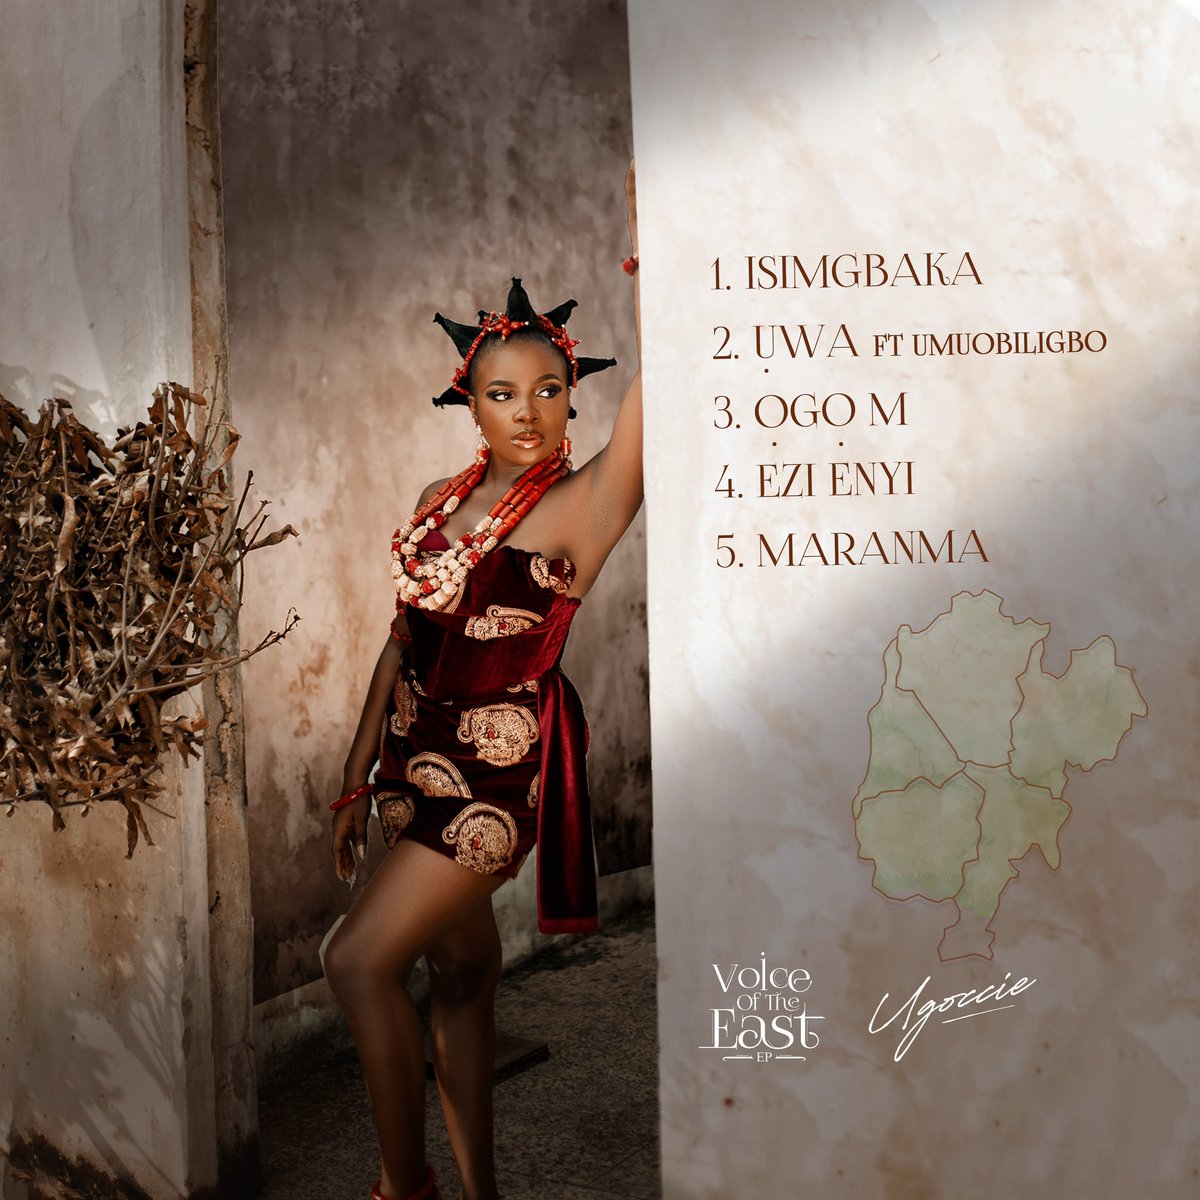 Super Thrilled and excited to unveil the tracklist for my EP “VOICE OF THE EAST” dropping on the 29th of March. 🎶 ✨ Ya kpọtuba 🔥 The powers are ready to be unleashed. #VoteEp